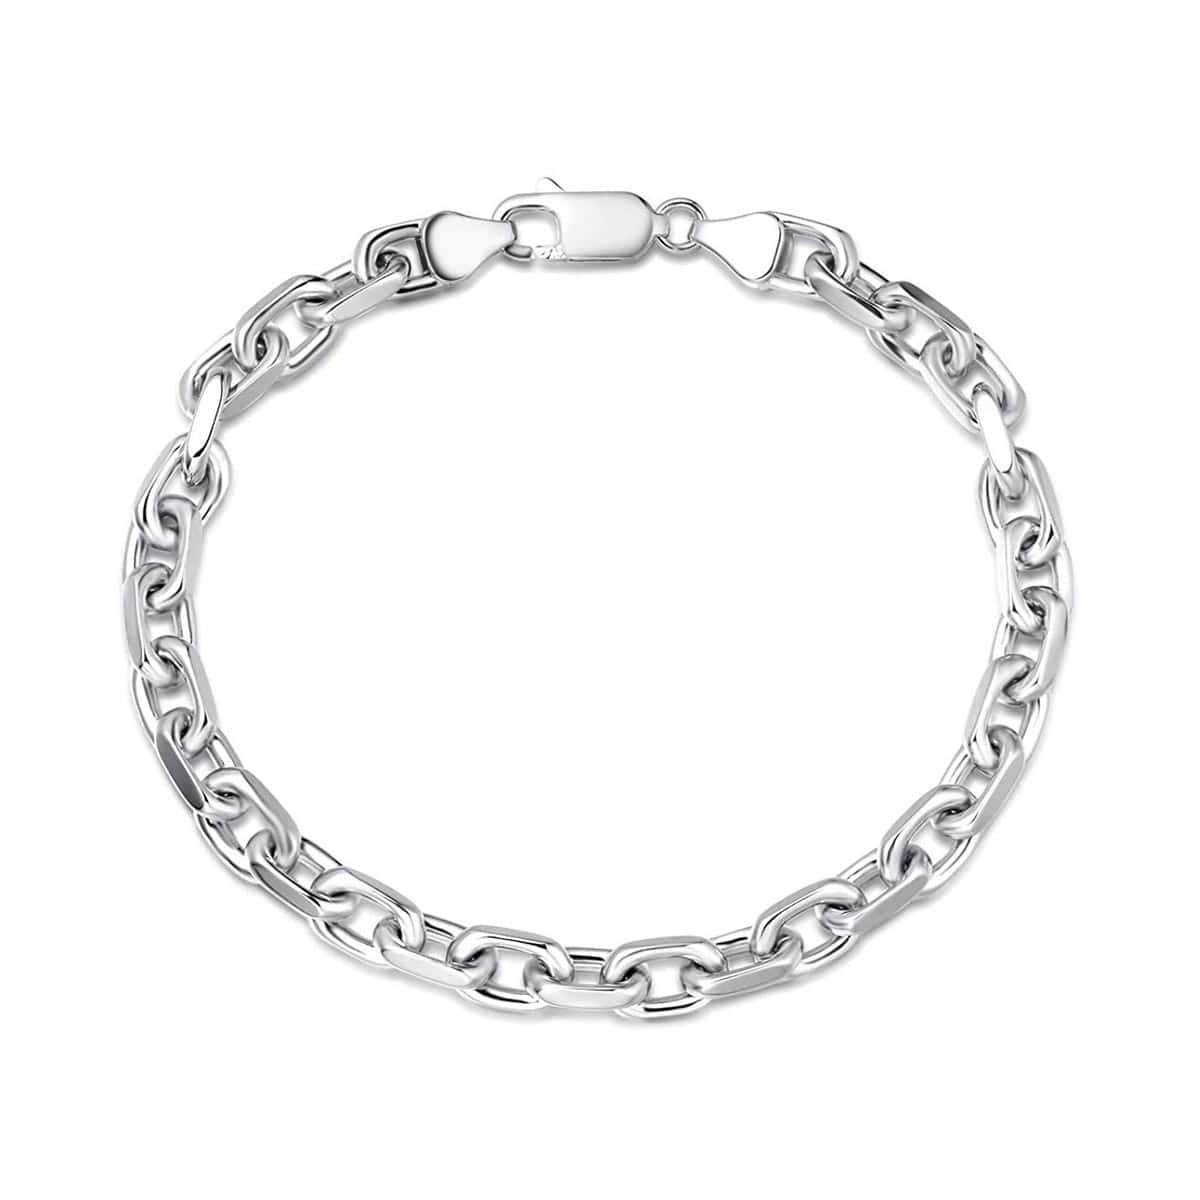 FANCIME Men's Oval Cable Chain Sterling Silver Bracelet Main